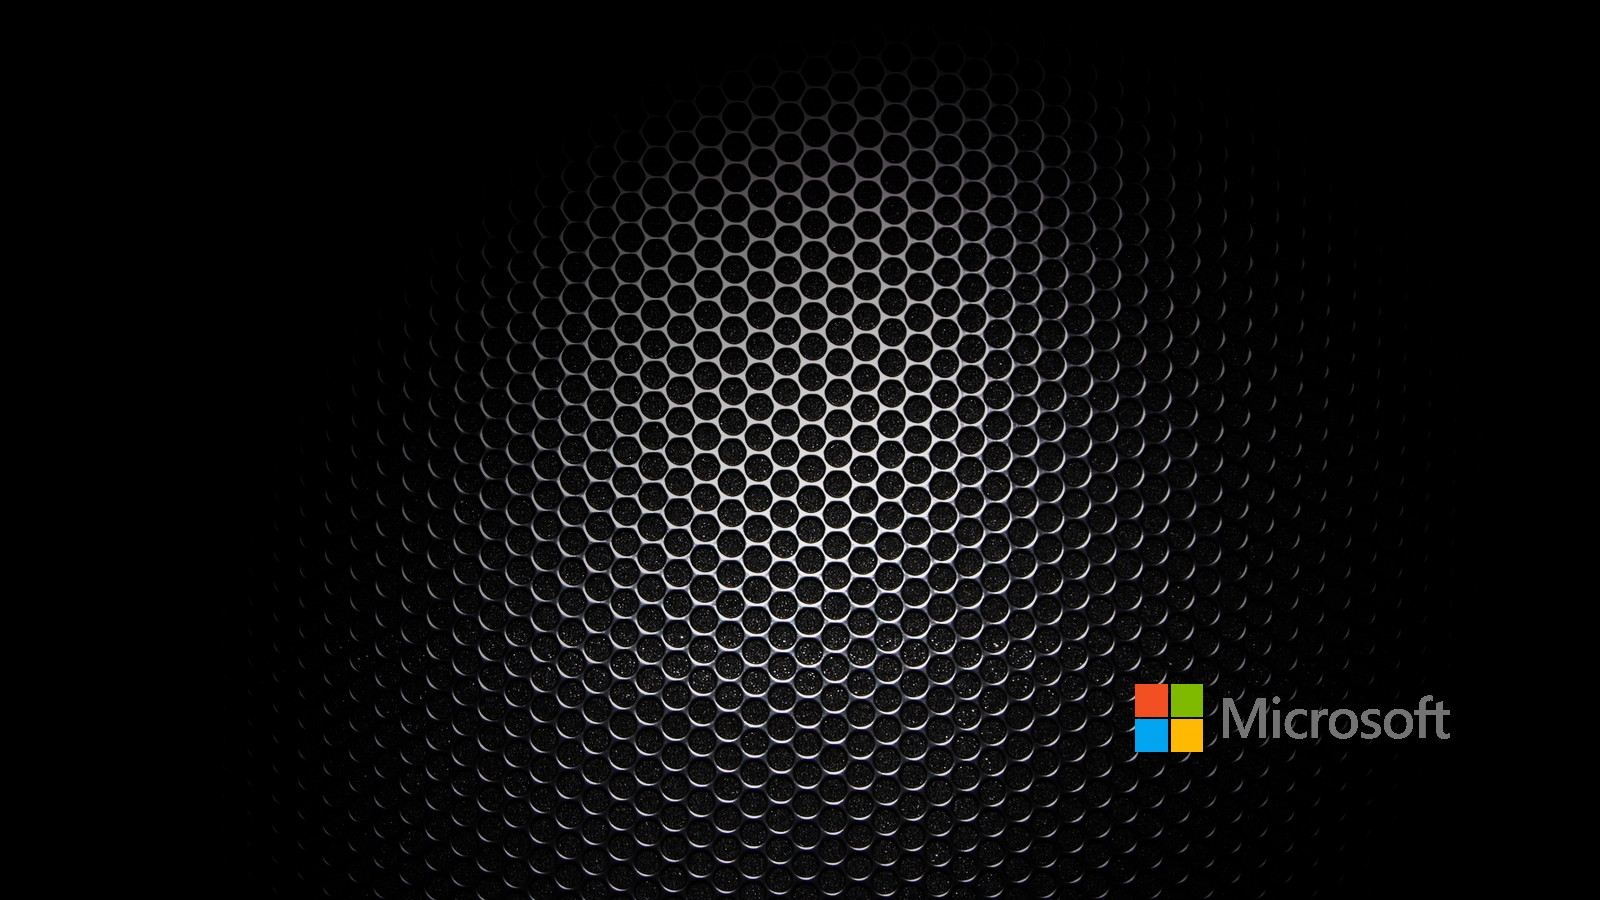 Microsoft Free Wallpaper 41 Microsoft Images for Free